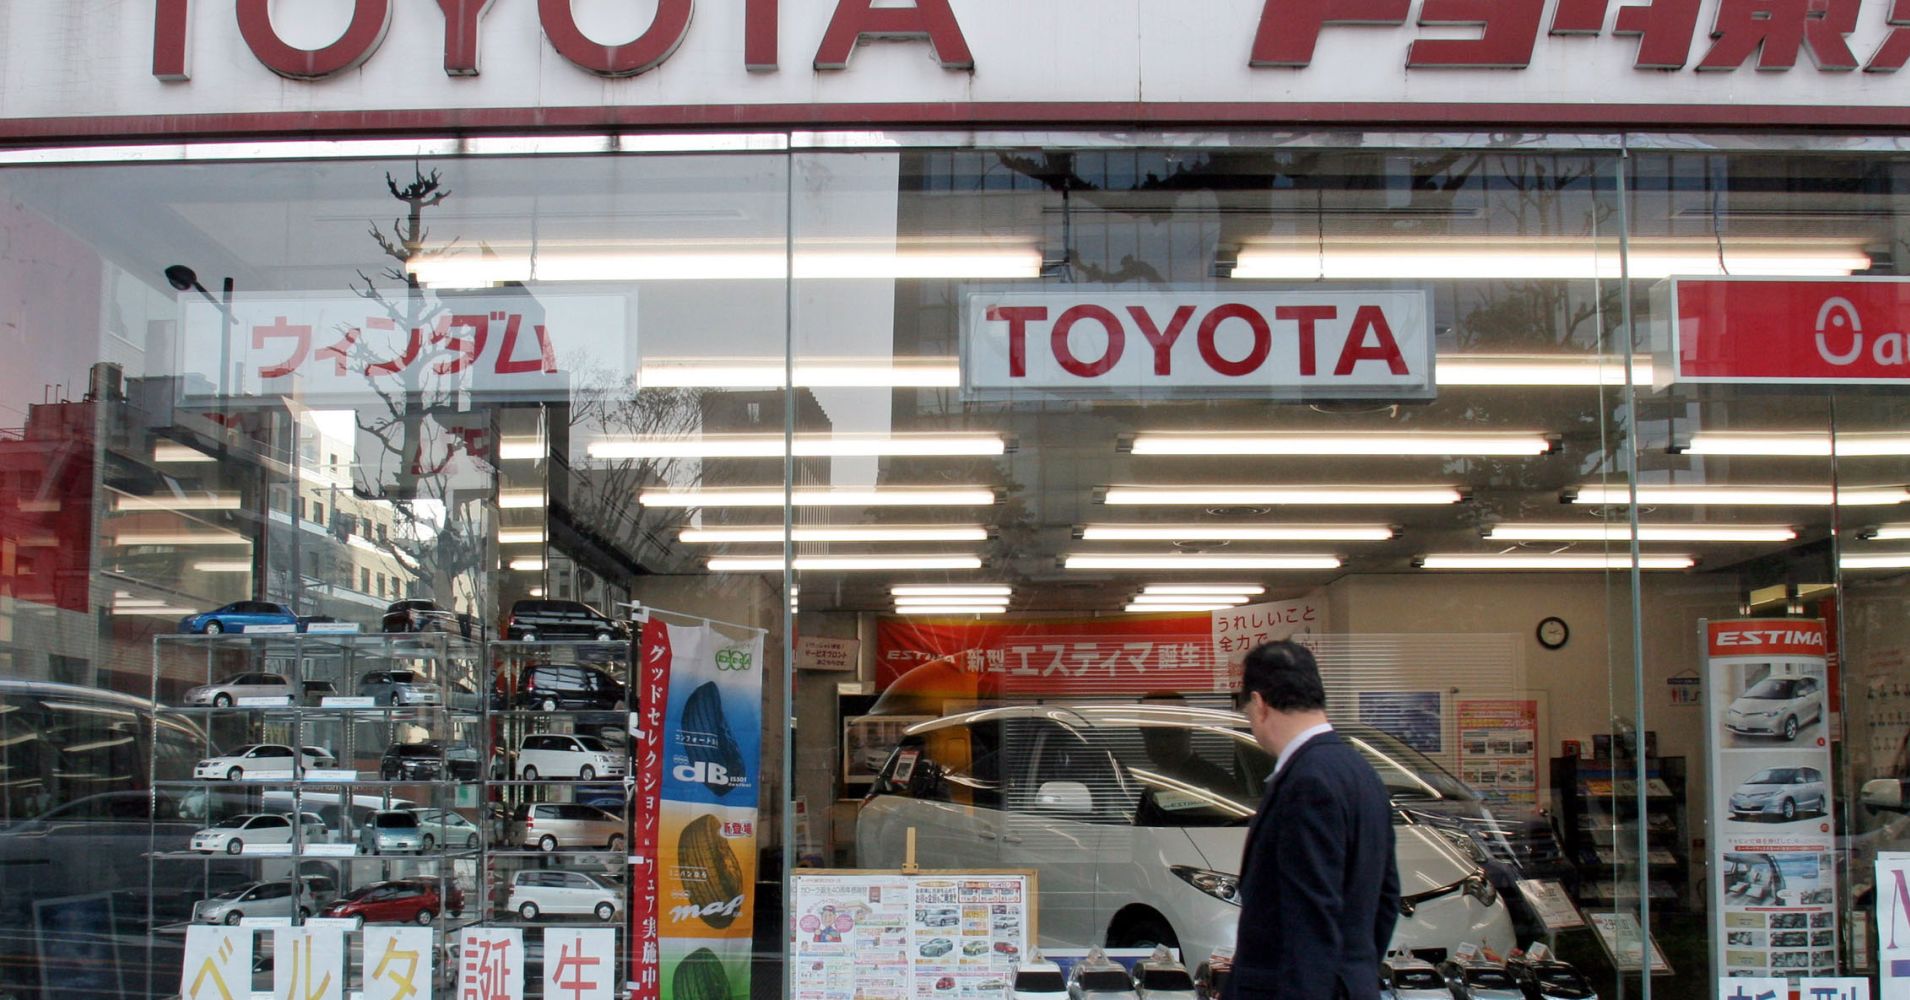 Toyota, Honda dominate in the US, but GM and Ford are failing in Japan